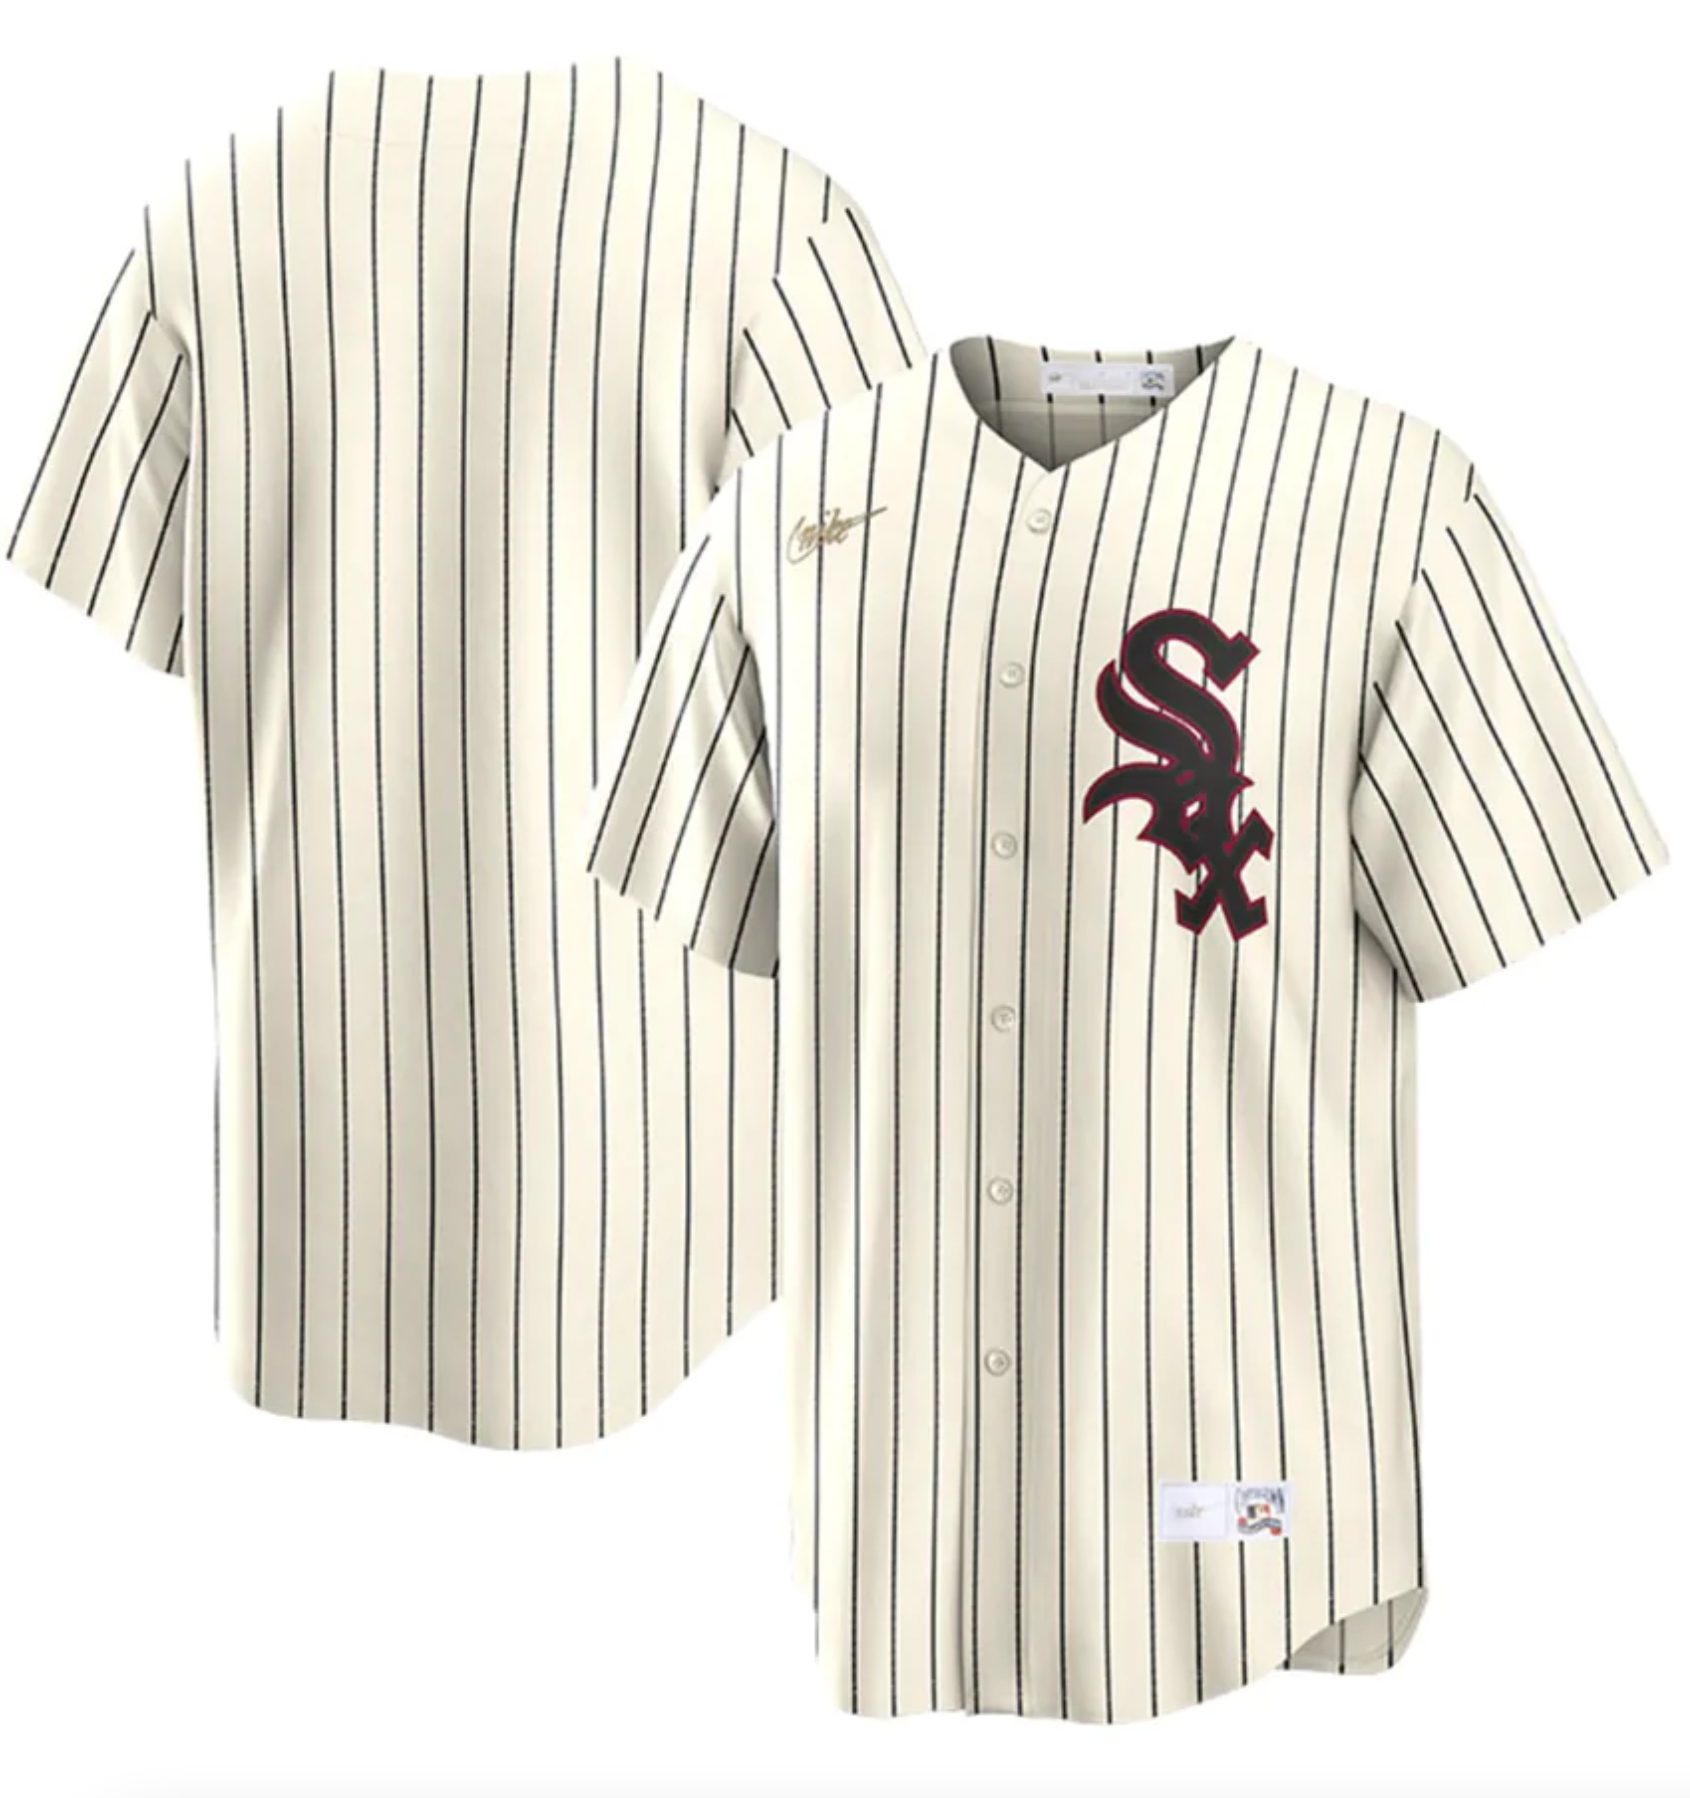 Chicago White Sox 1959 Home Replica Jersey by Nike